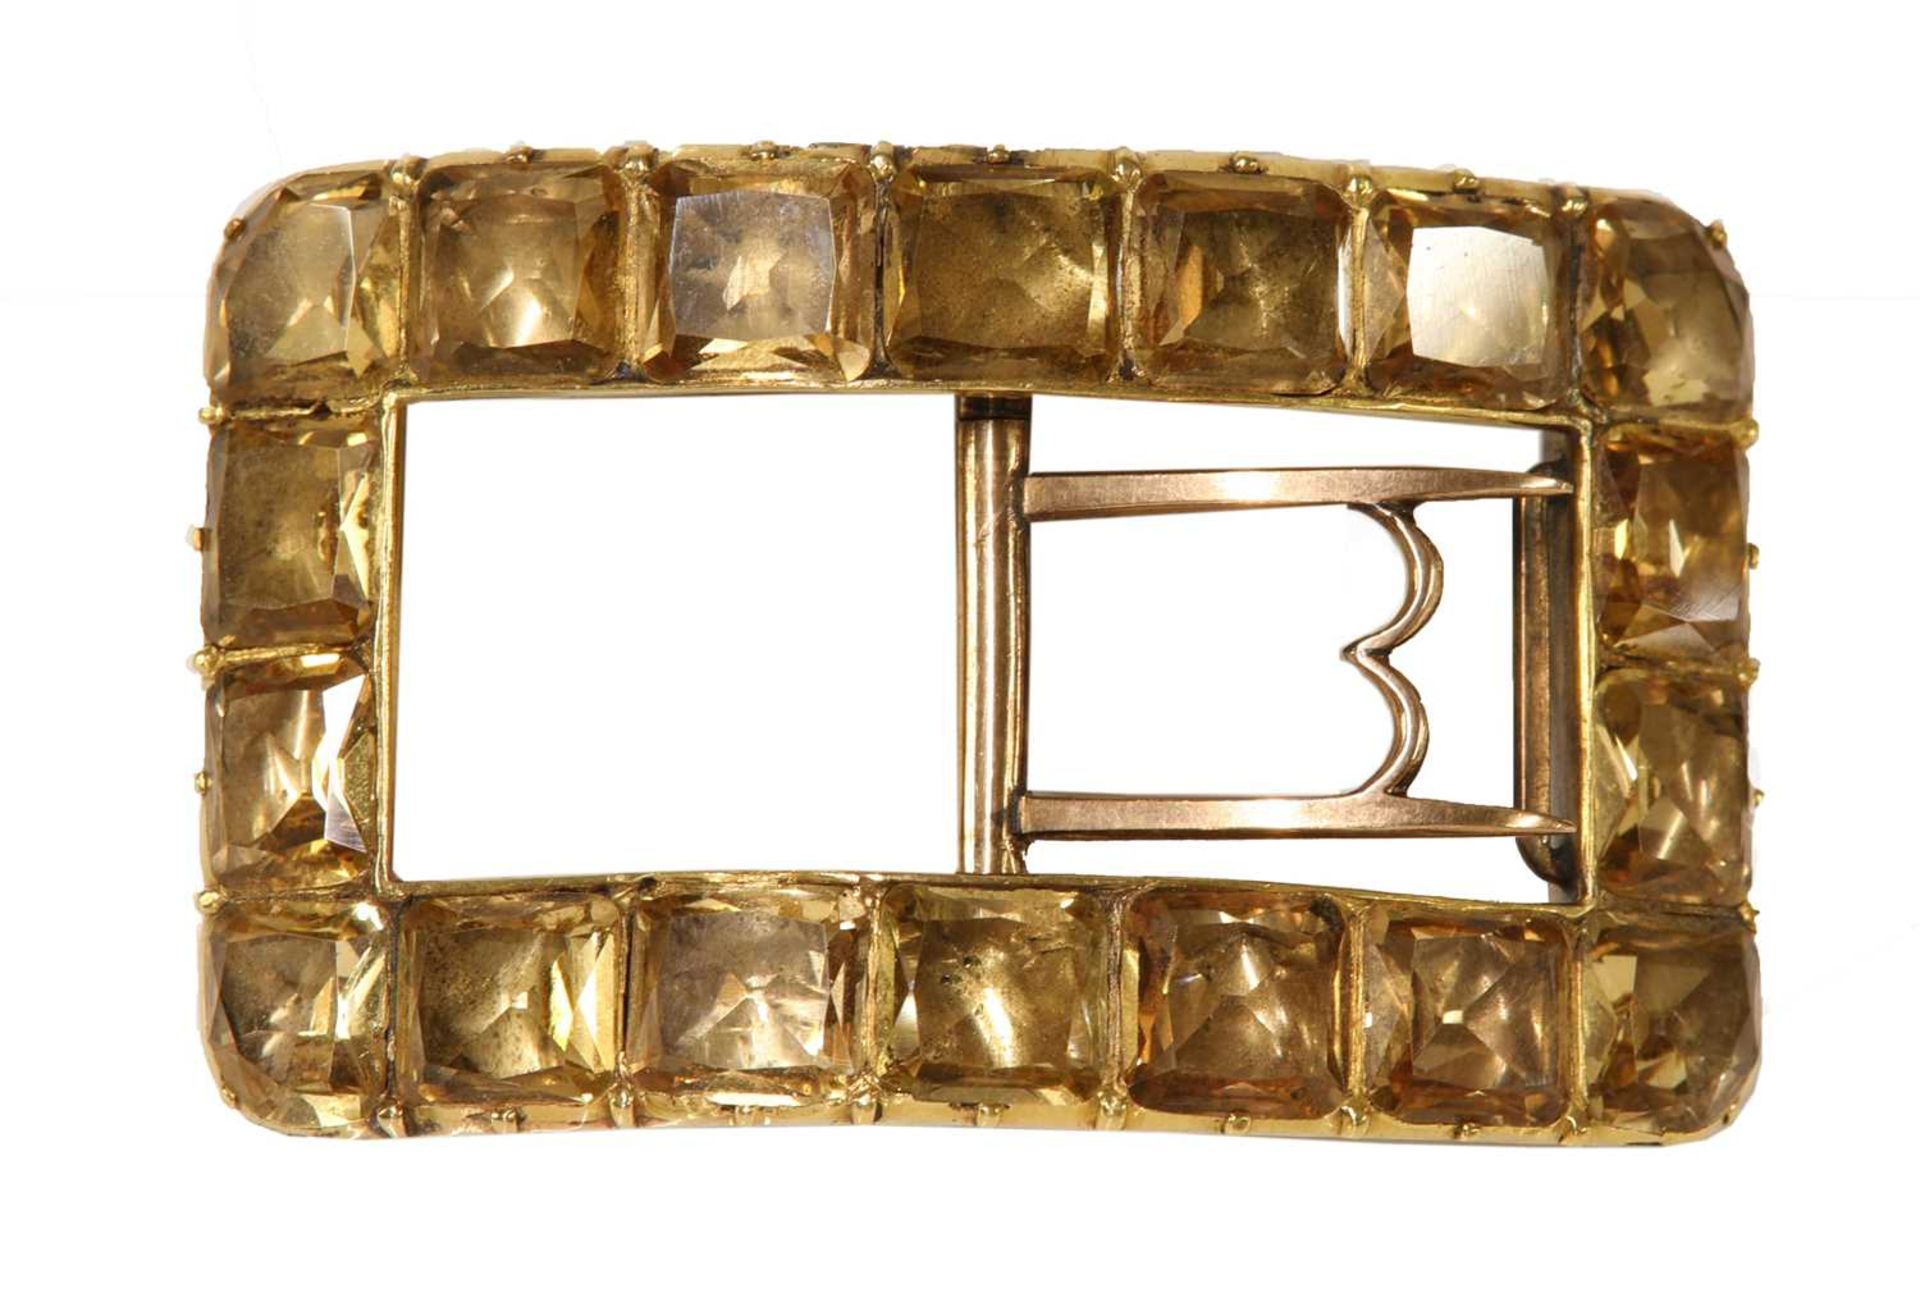 A pair of George III gold mounted topaz shoe buckles, c.1790, - Image 3 of 5